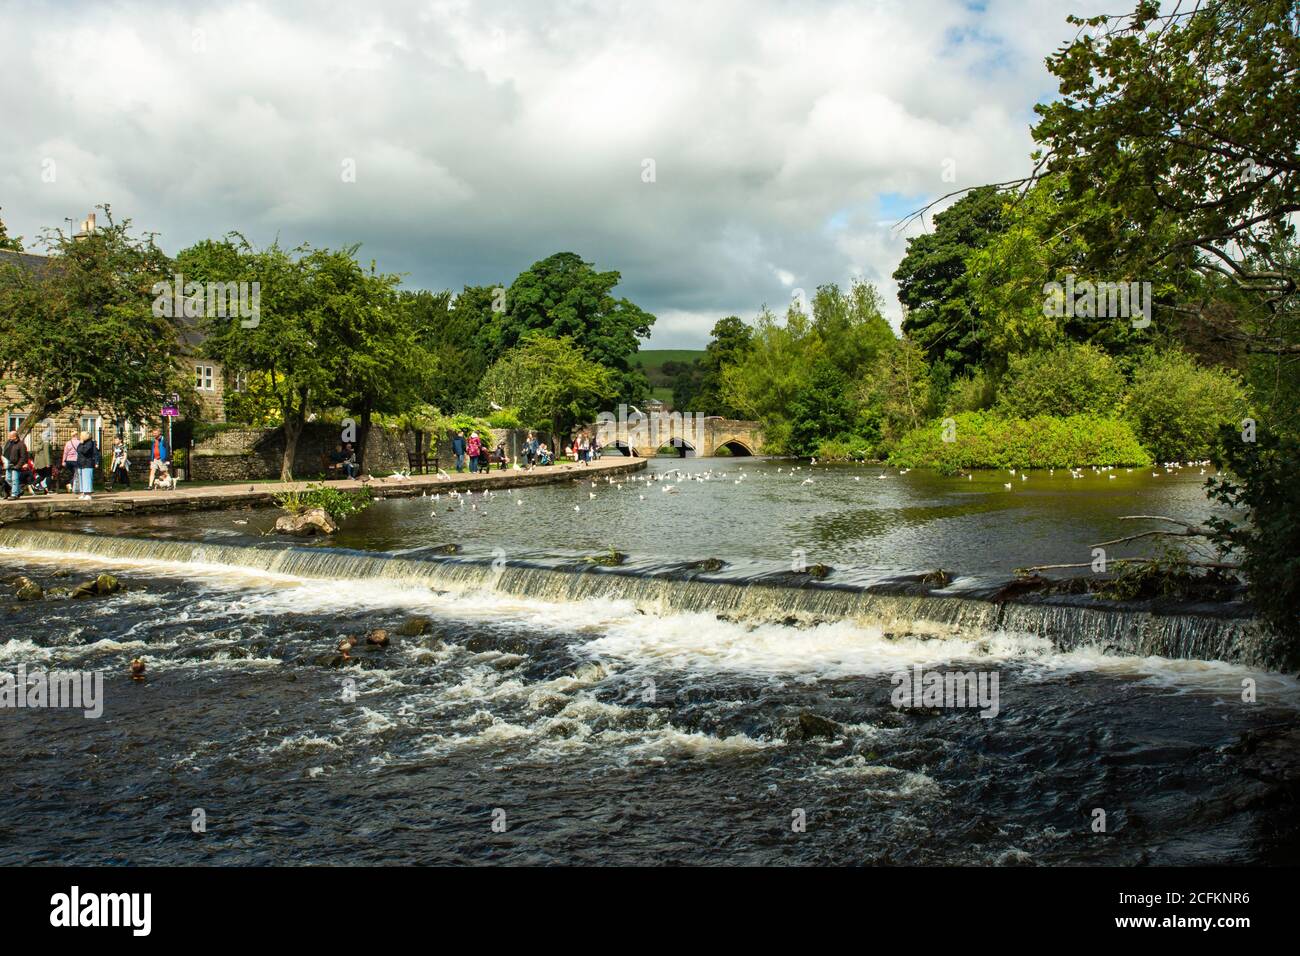 The river wye running through the village of Bakewell in the Derbyshire Dales England Stock Photo